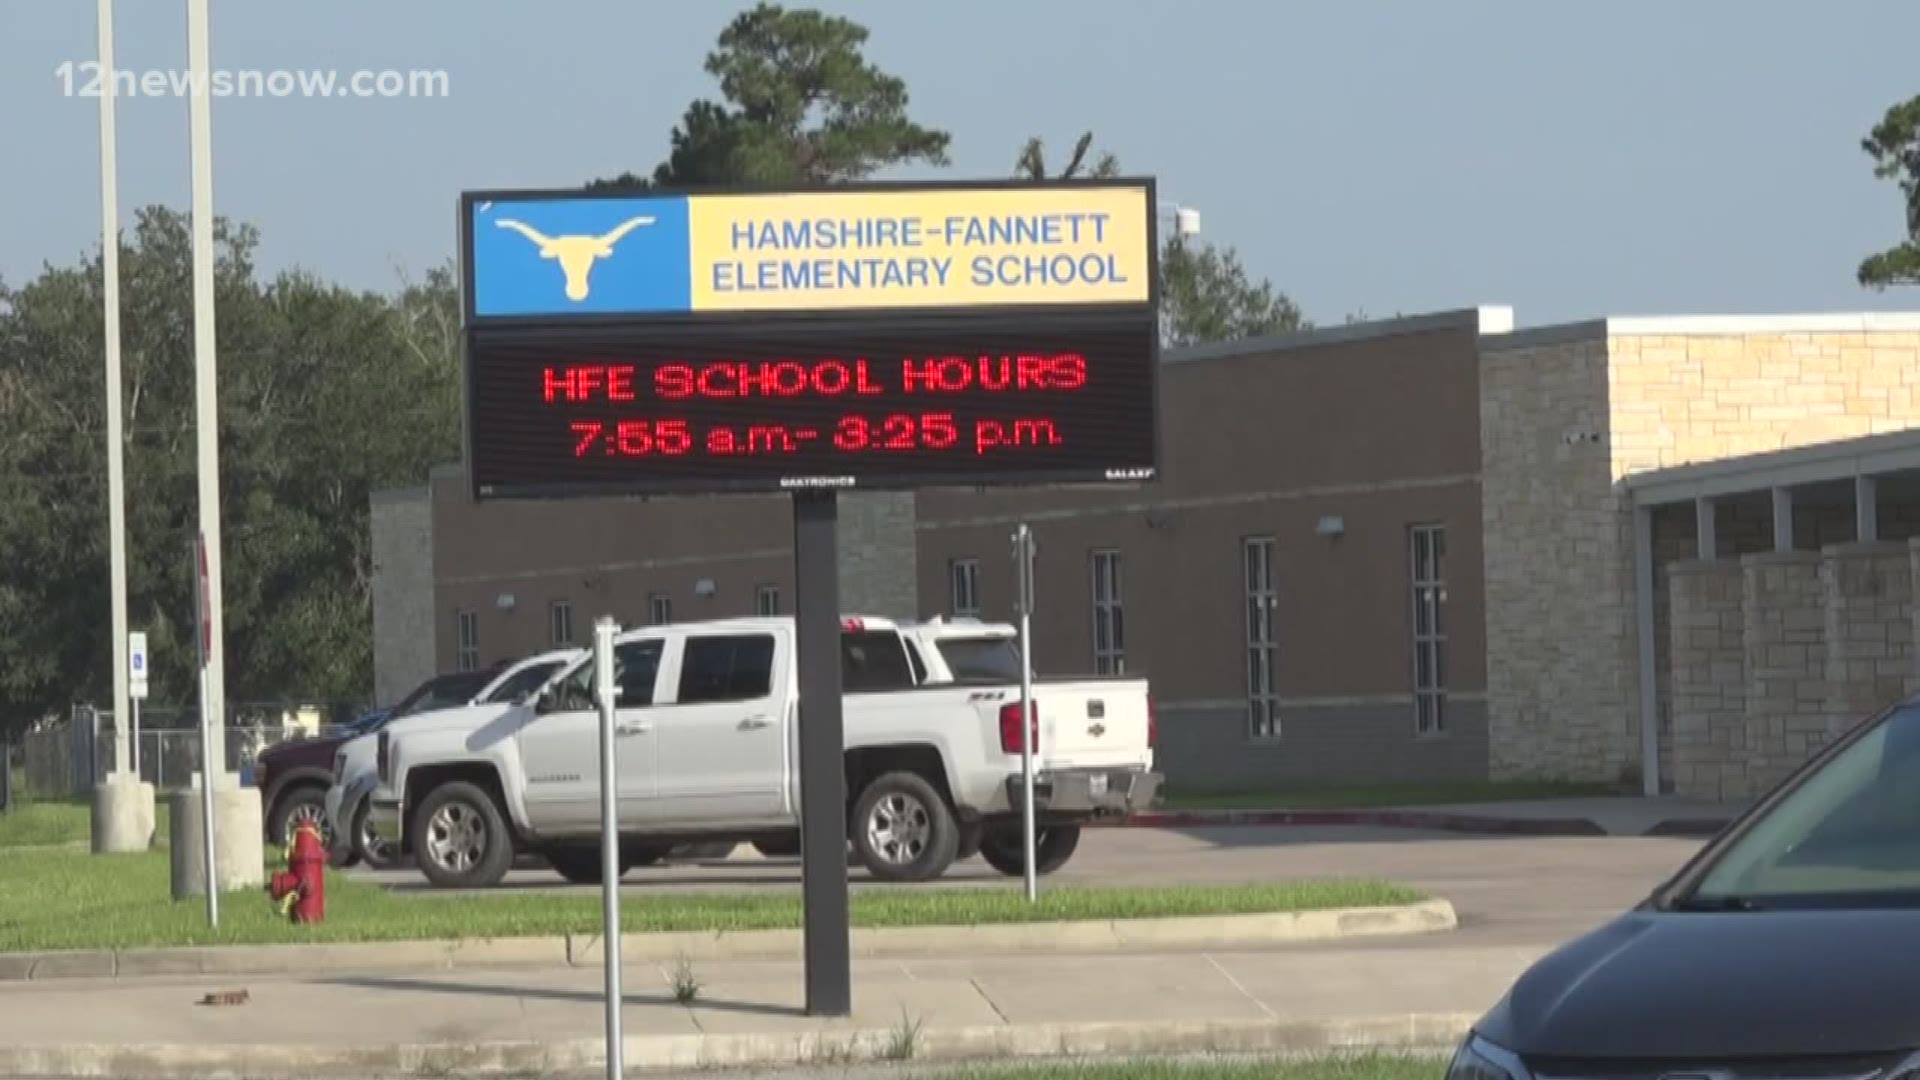 Starting on Monday, students in the Hamshire-Fannett school district will be heading back to class after Tropical Storm Imelda.